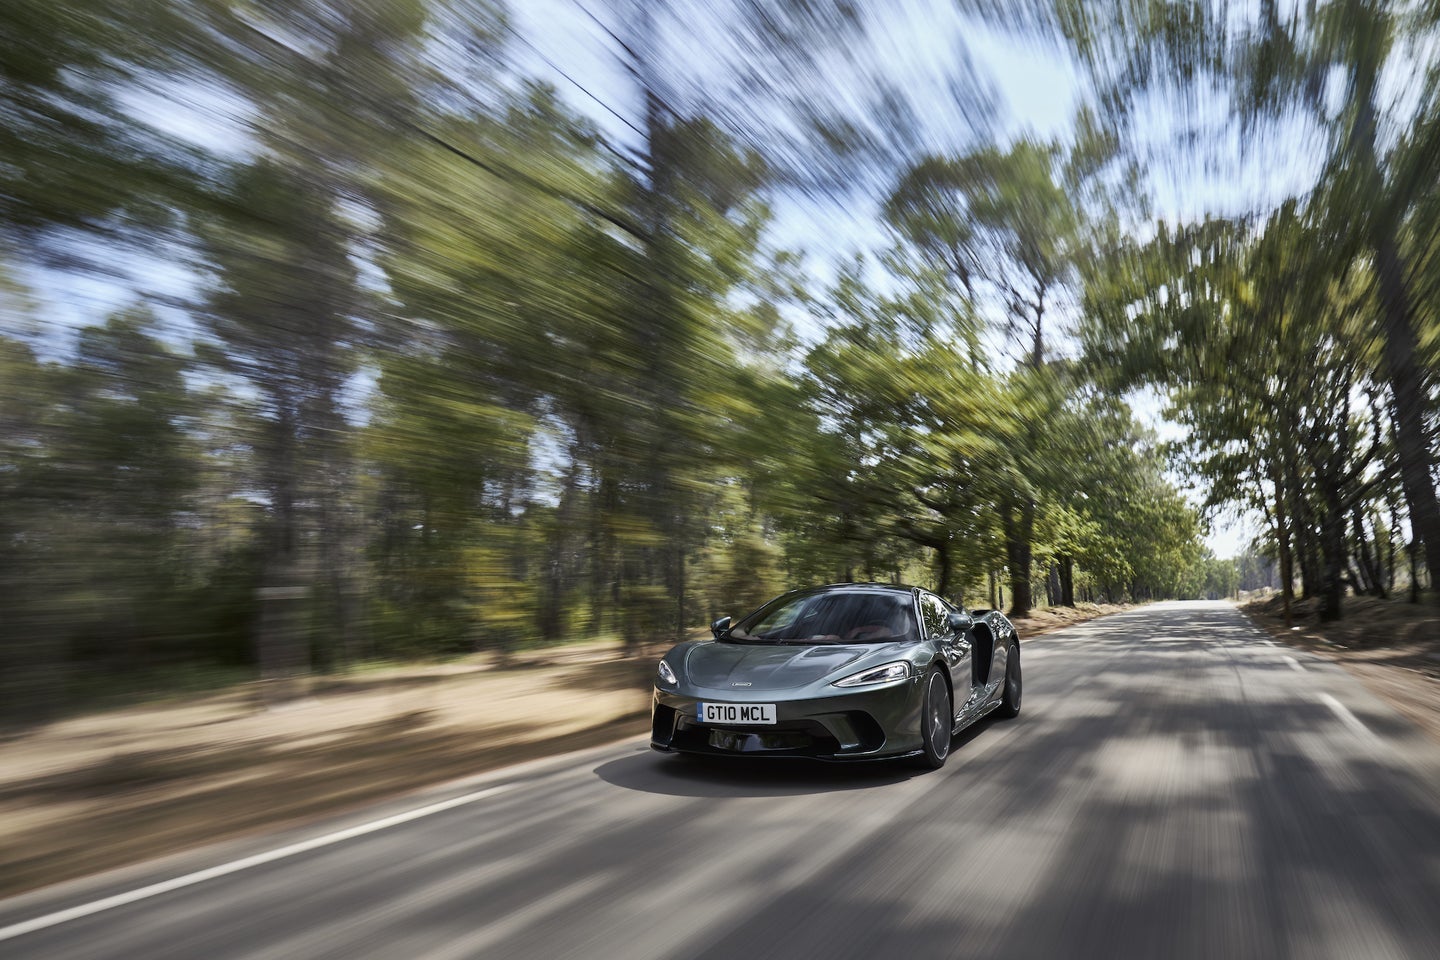 A Mclaren GT supercar driving on the road